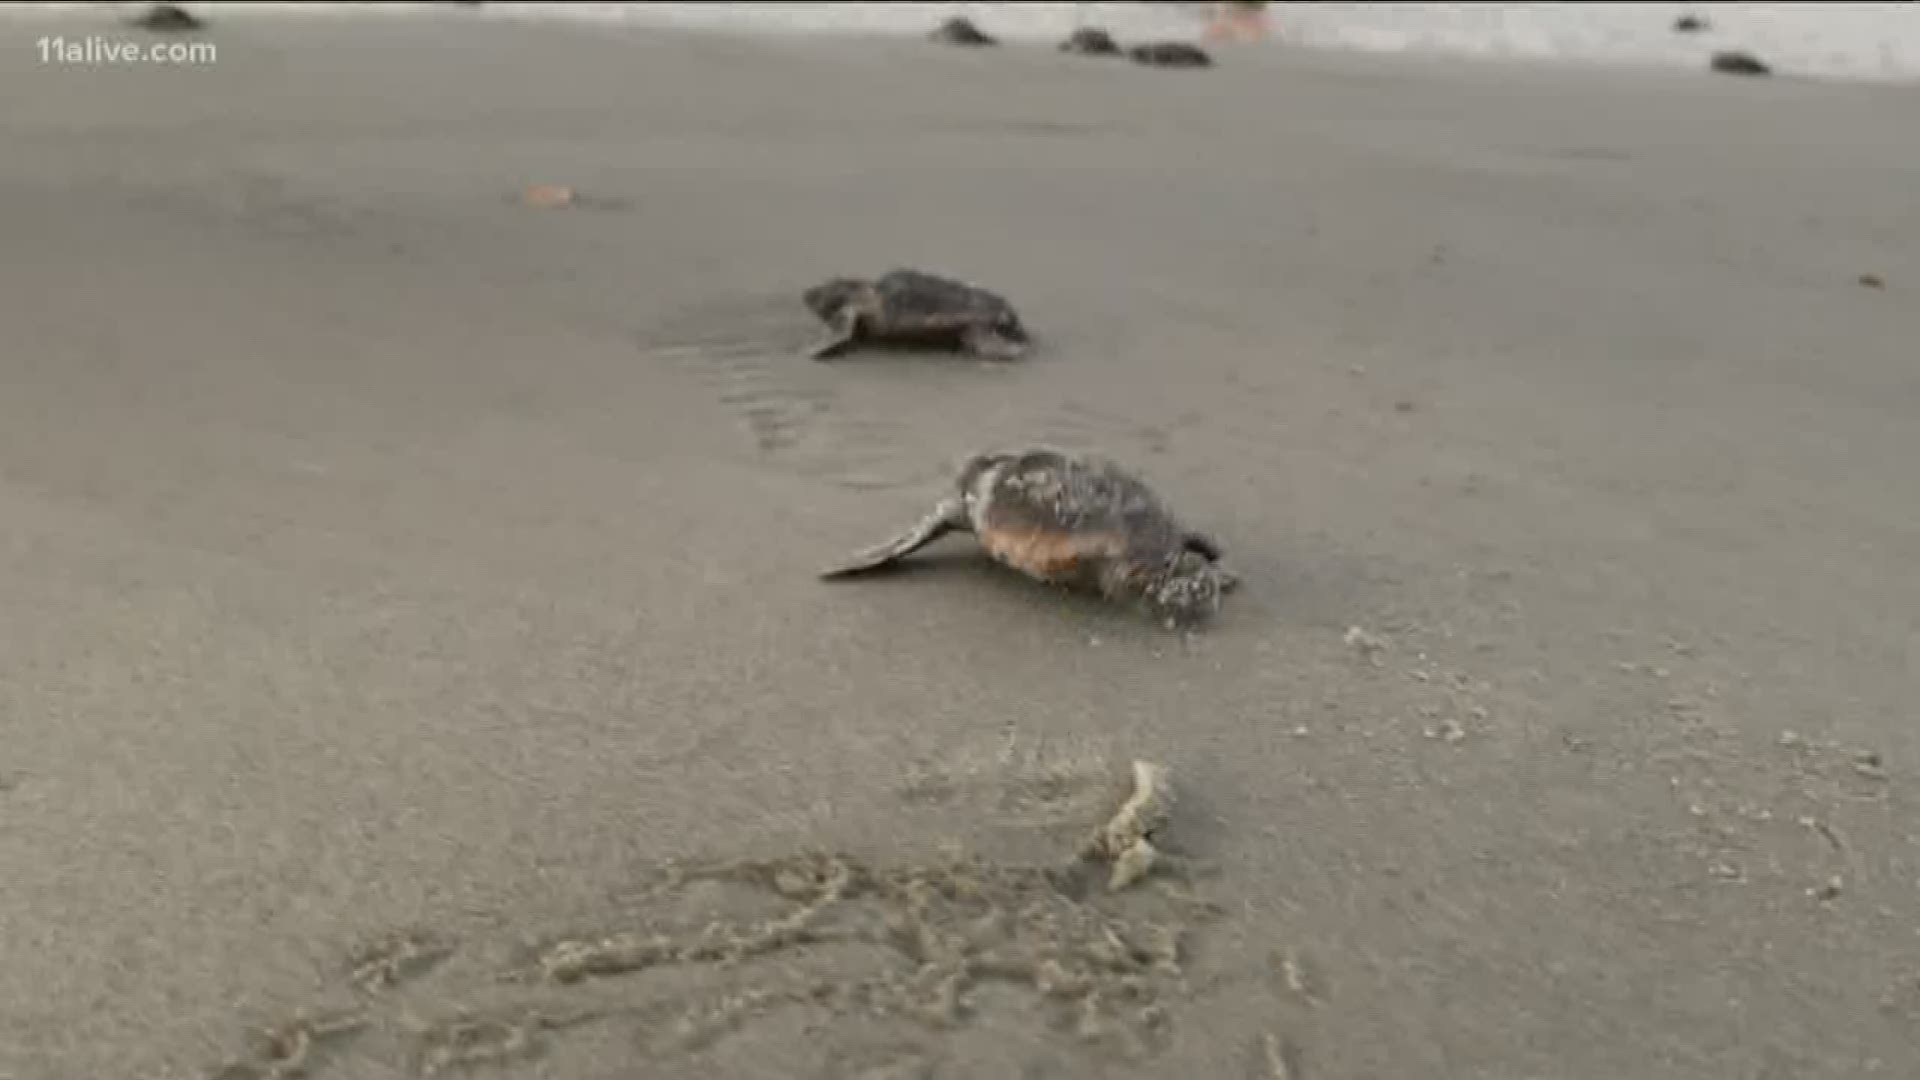 The Turtle Patrol dug into the sand and found they’d hatched and were ready to make their way into the ocean.